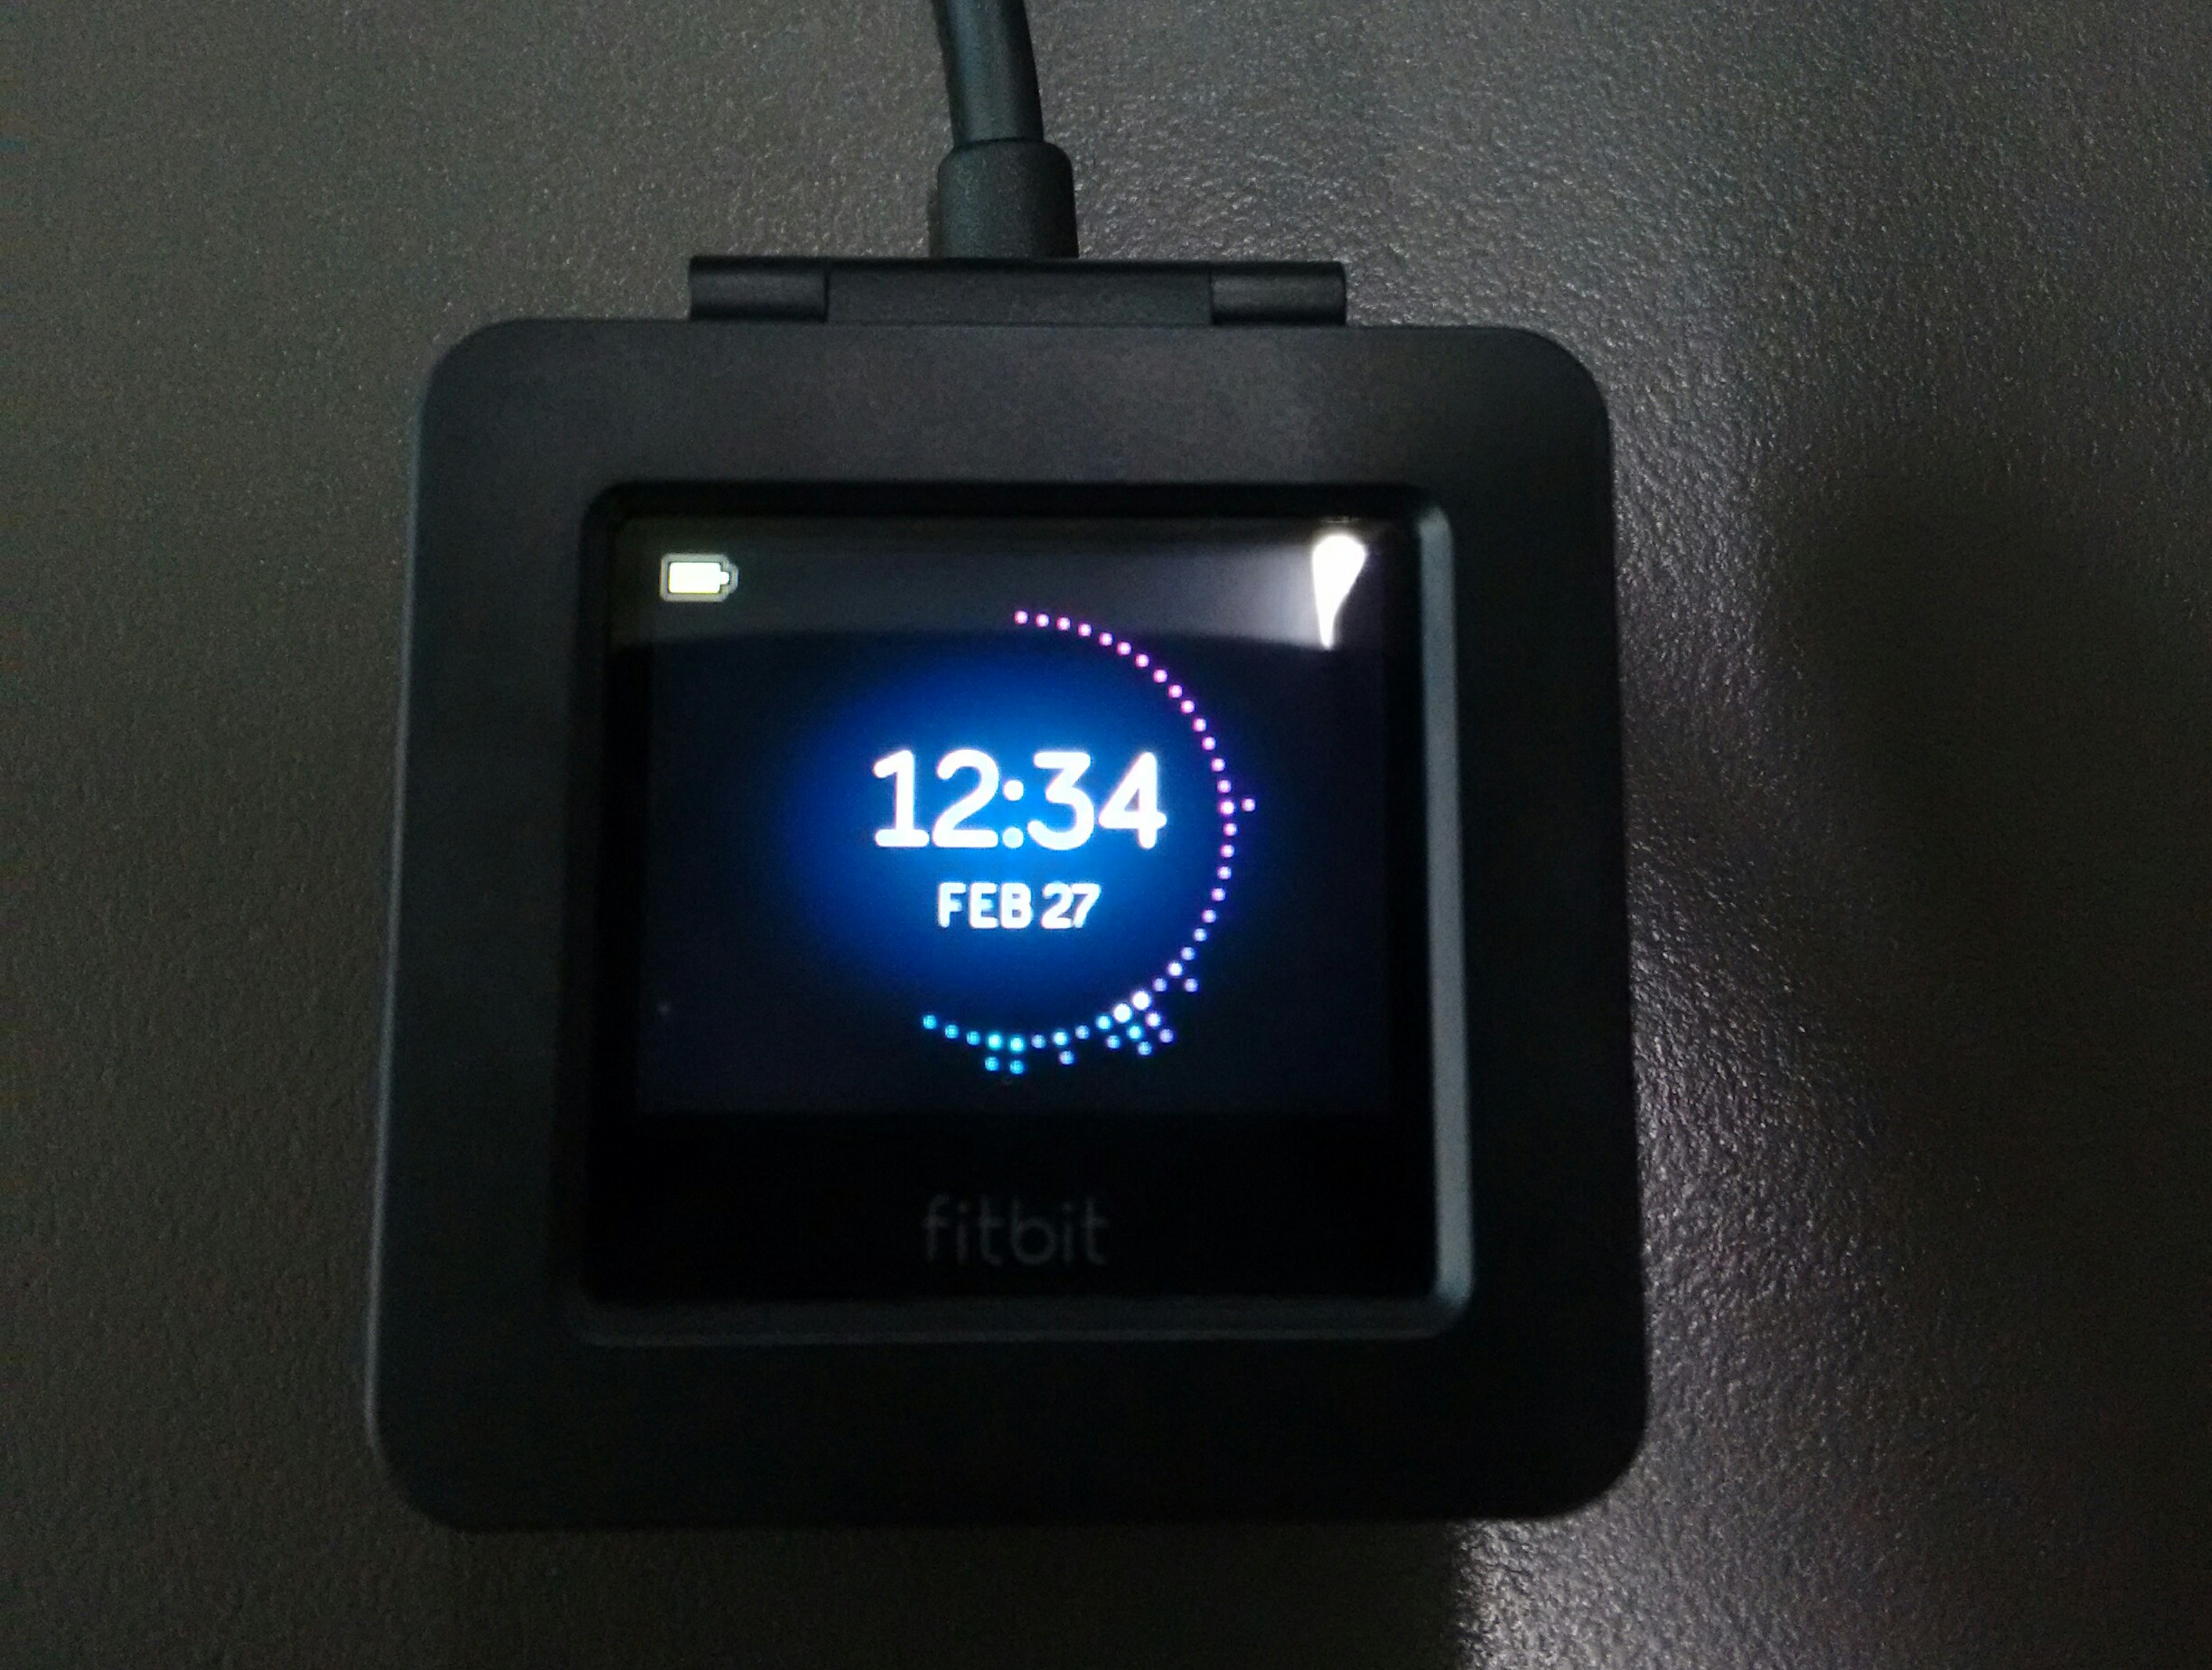 fitbit blaze charge